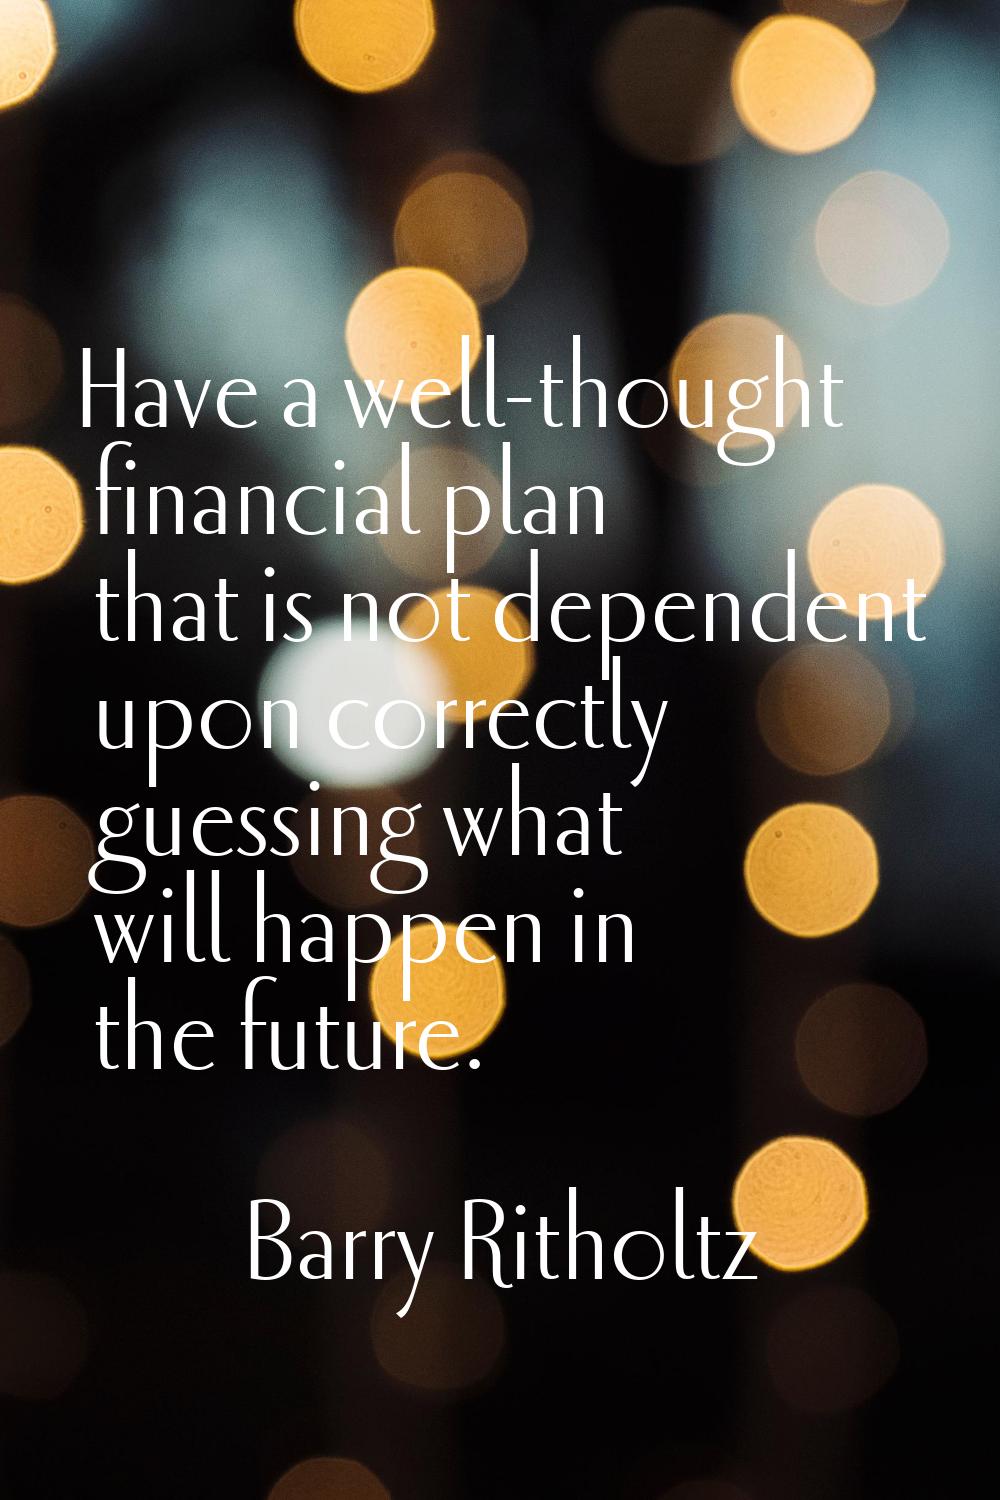 Have a well-thought financial plan that is not dependent upon correctly guessing what will happen i